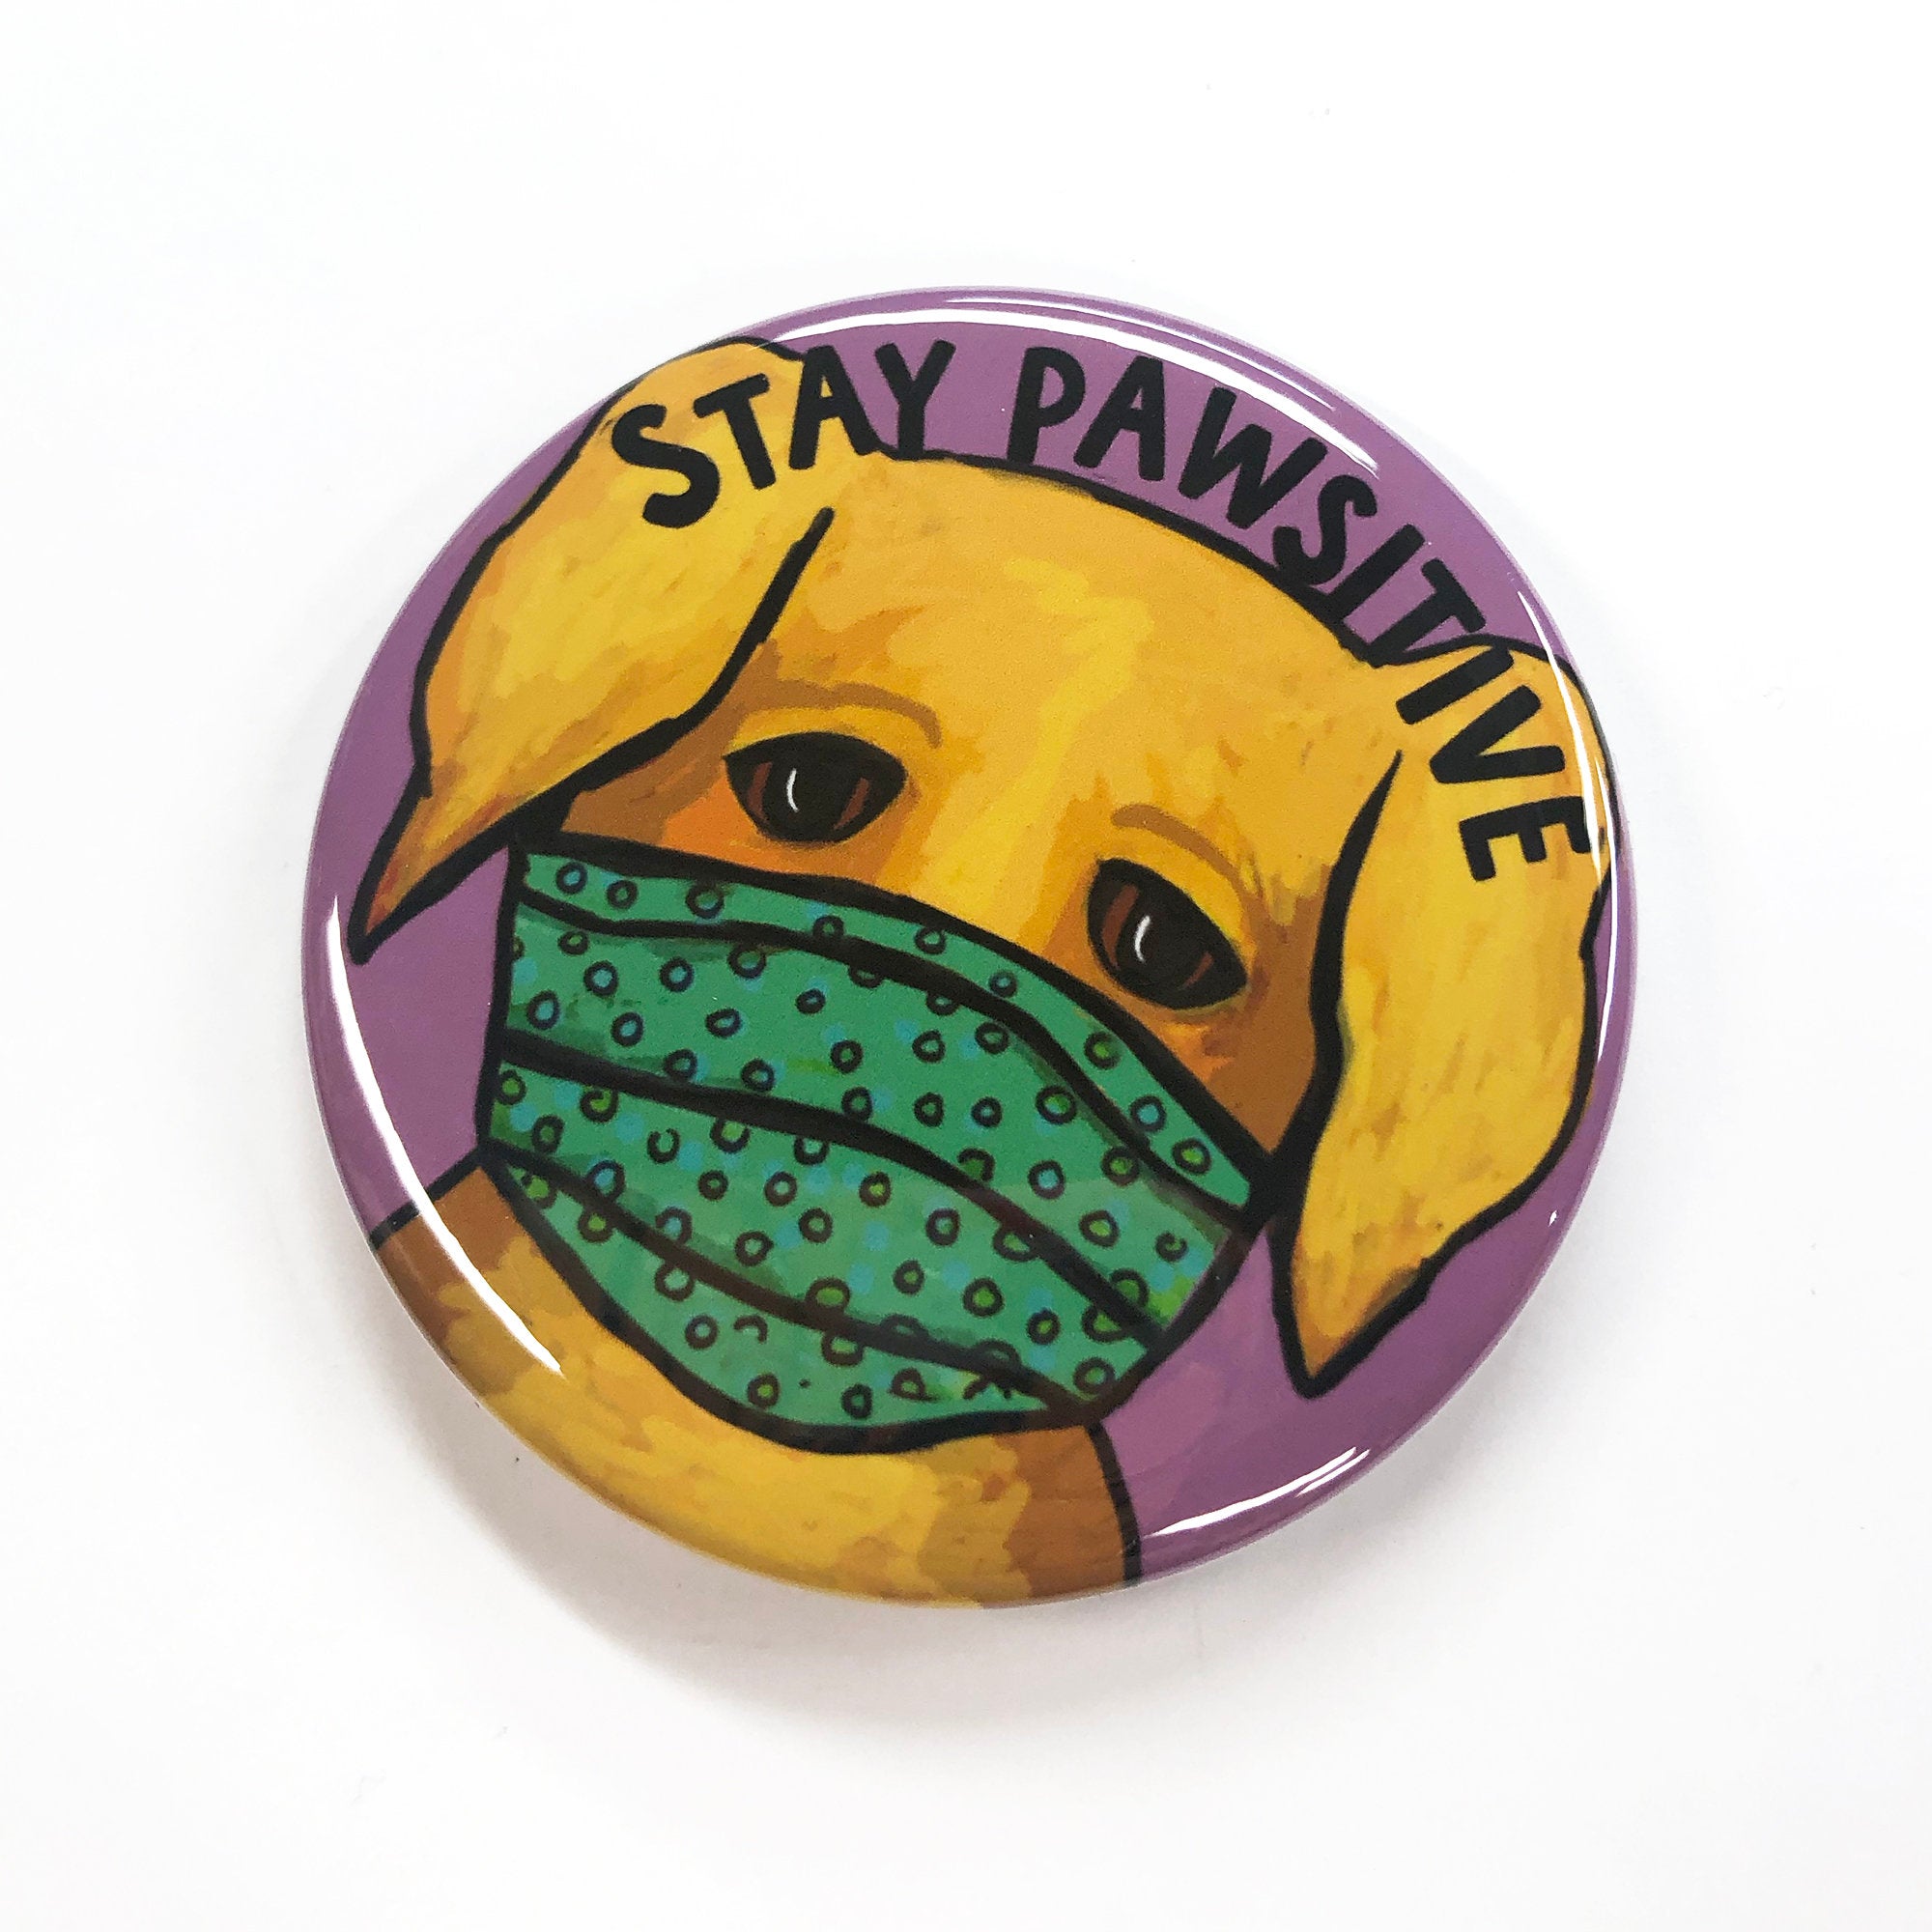 Stay Pawsitive Dog Pin, Magnet, or Pocket Mirror